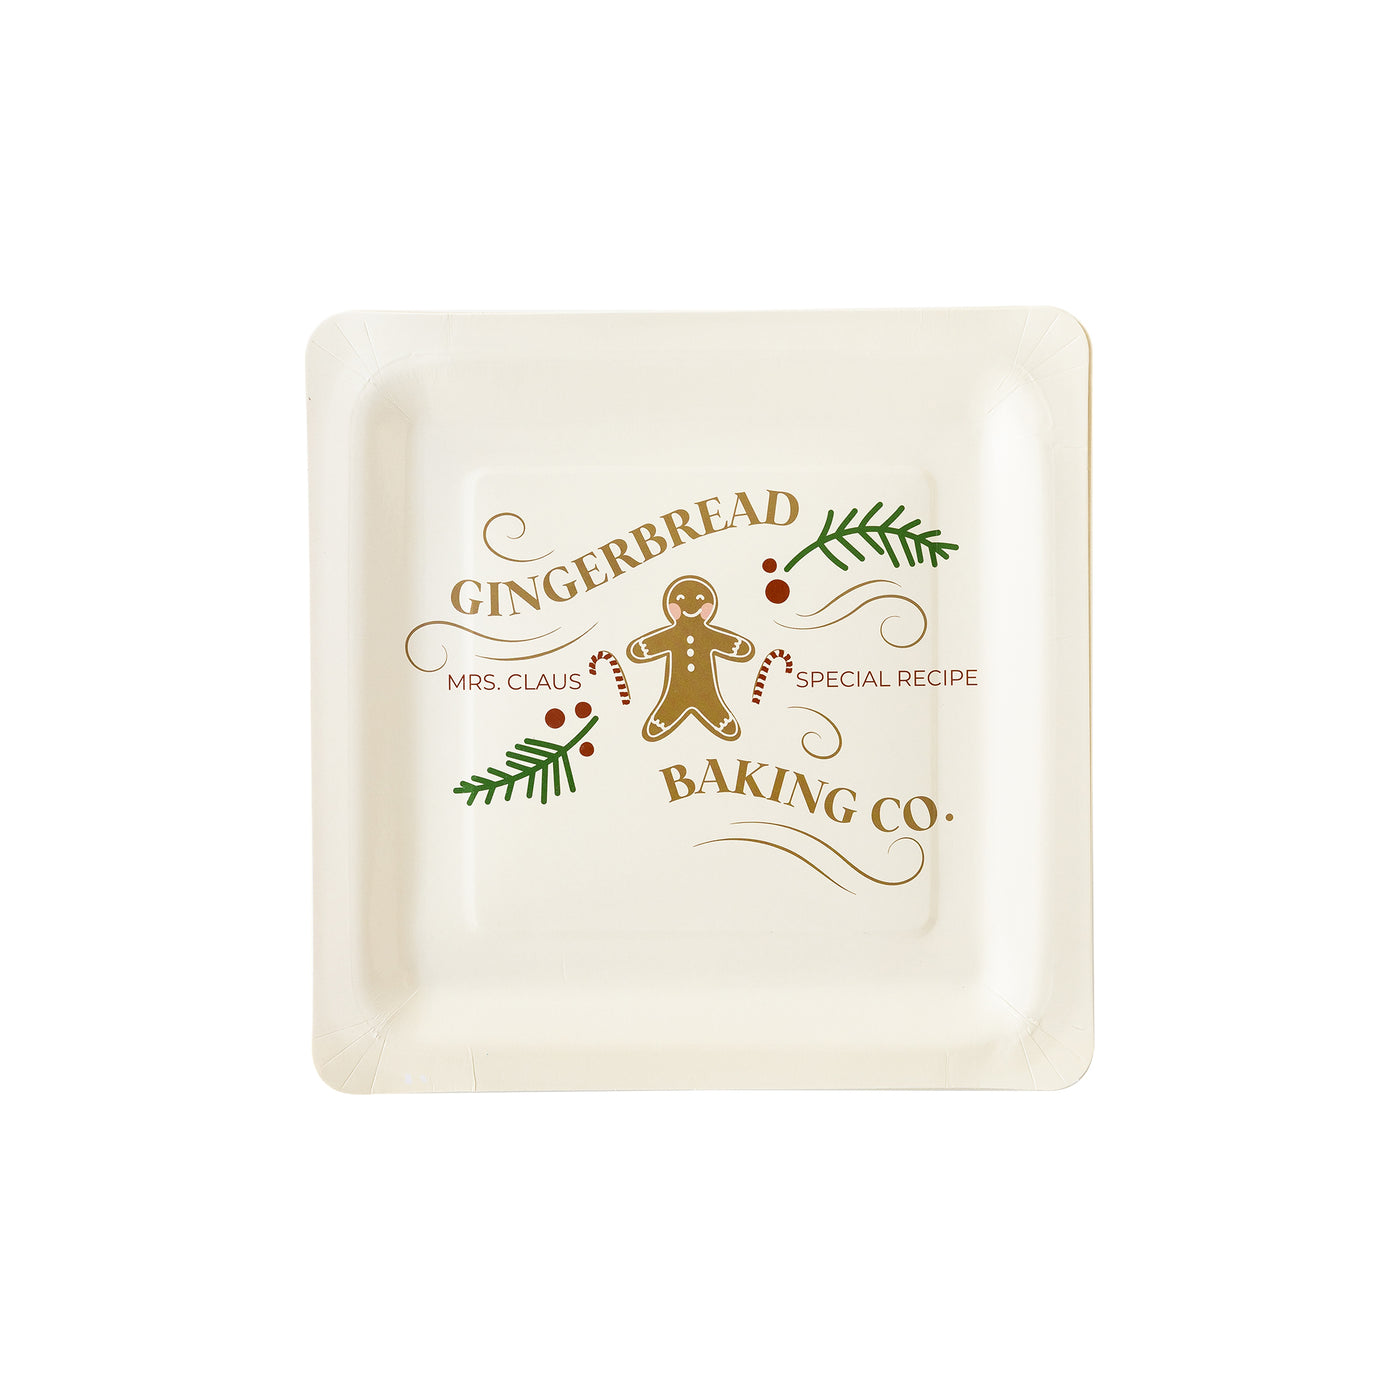 PLTS392C - Gingerbread Brand Paper Plate